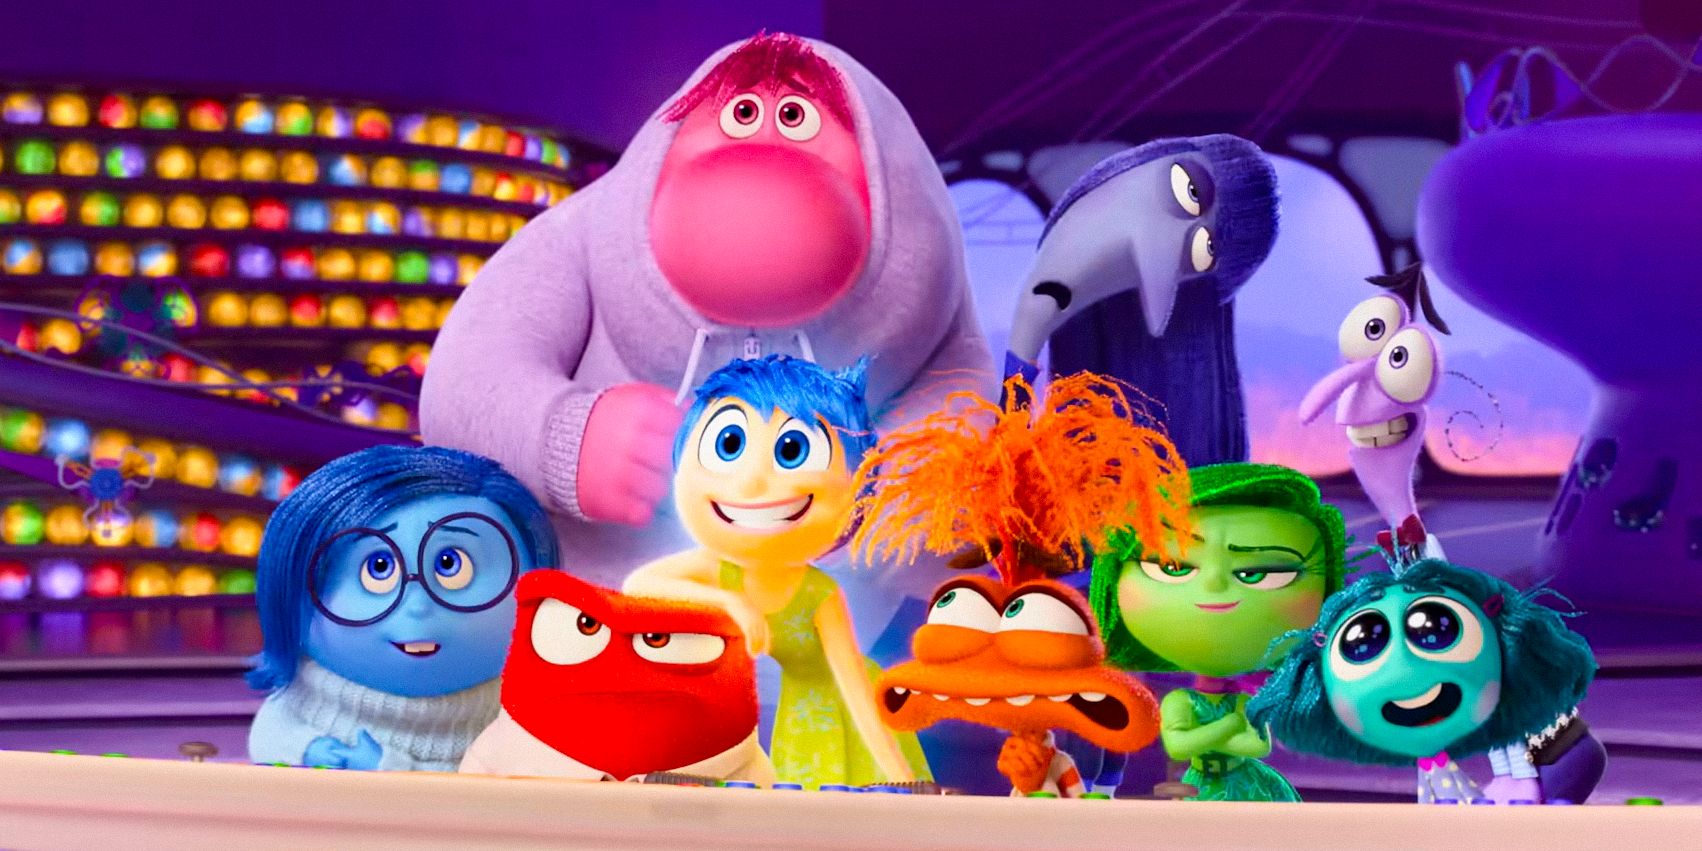 Embarrassment, Ennui, Sadness, Anger, Joy, Anxiety, Disgust, Envy, and Fear posing for a selfie in Inside Out 2